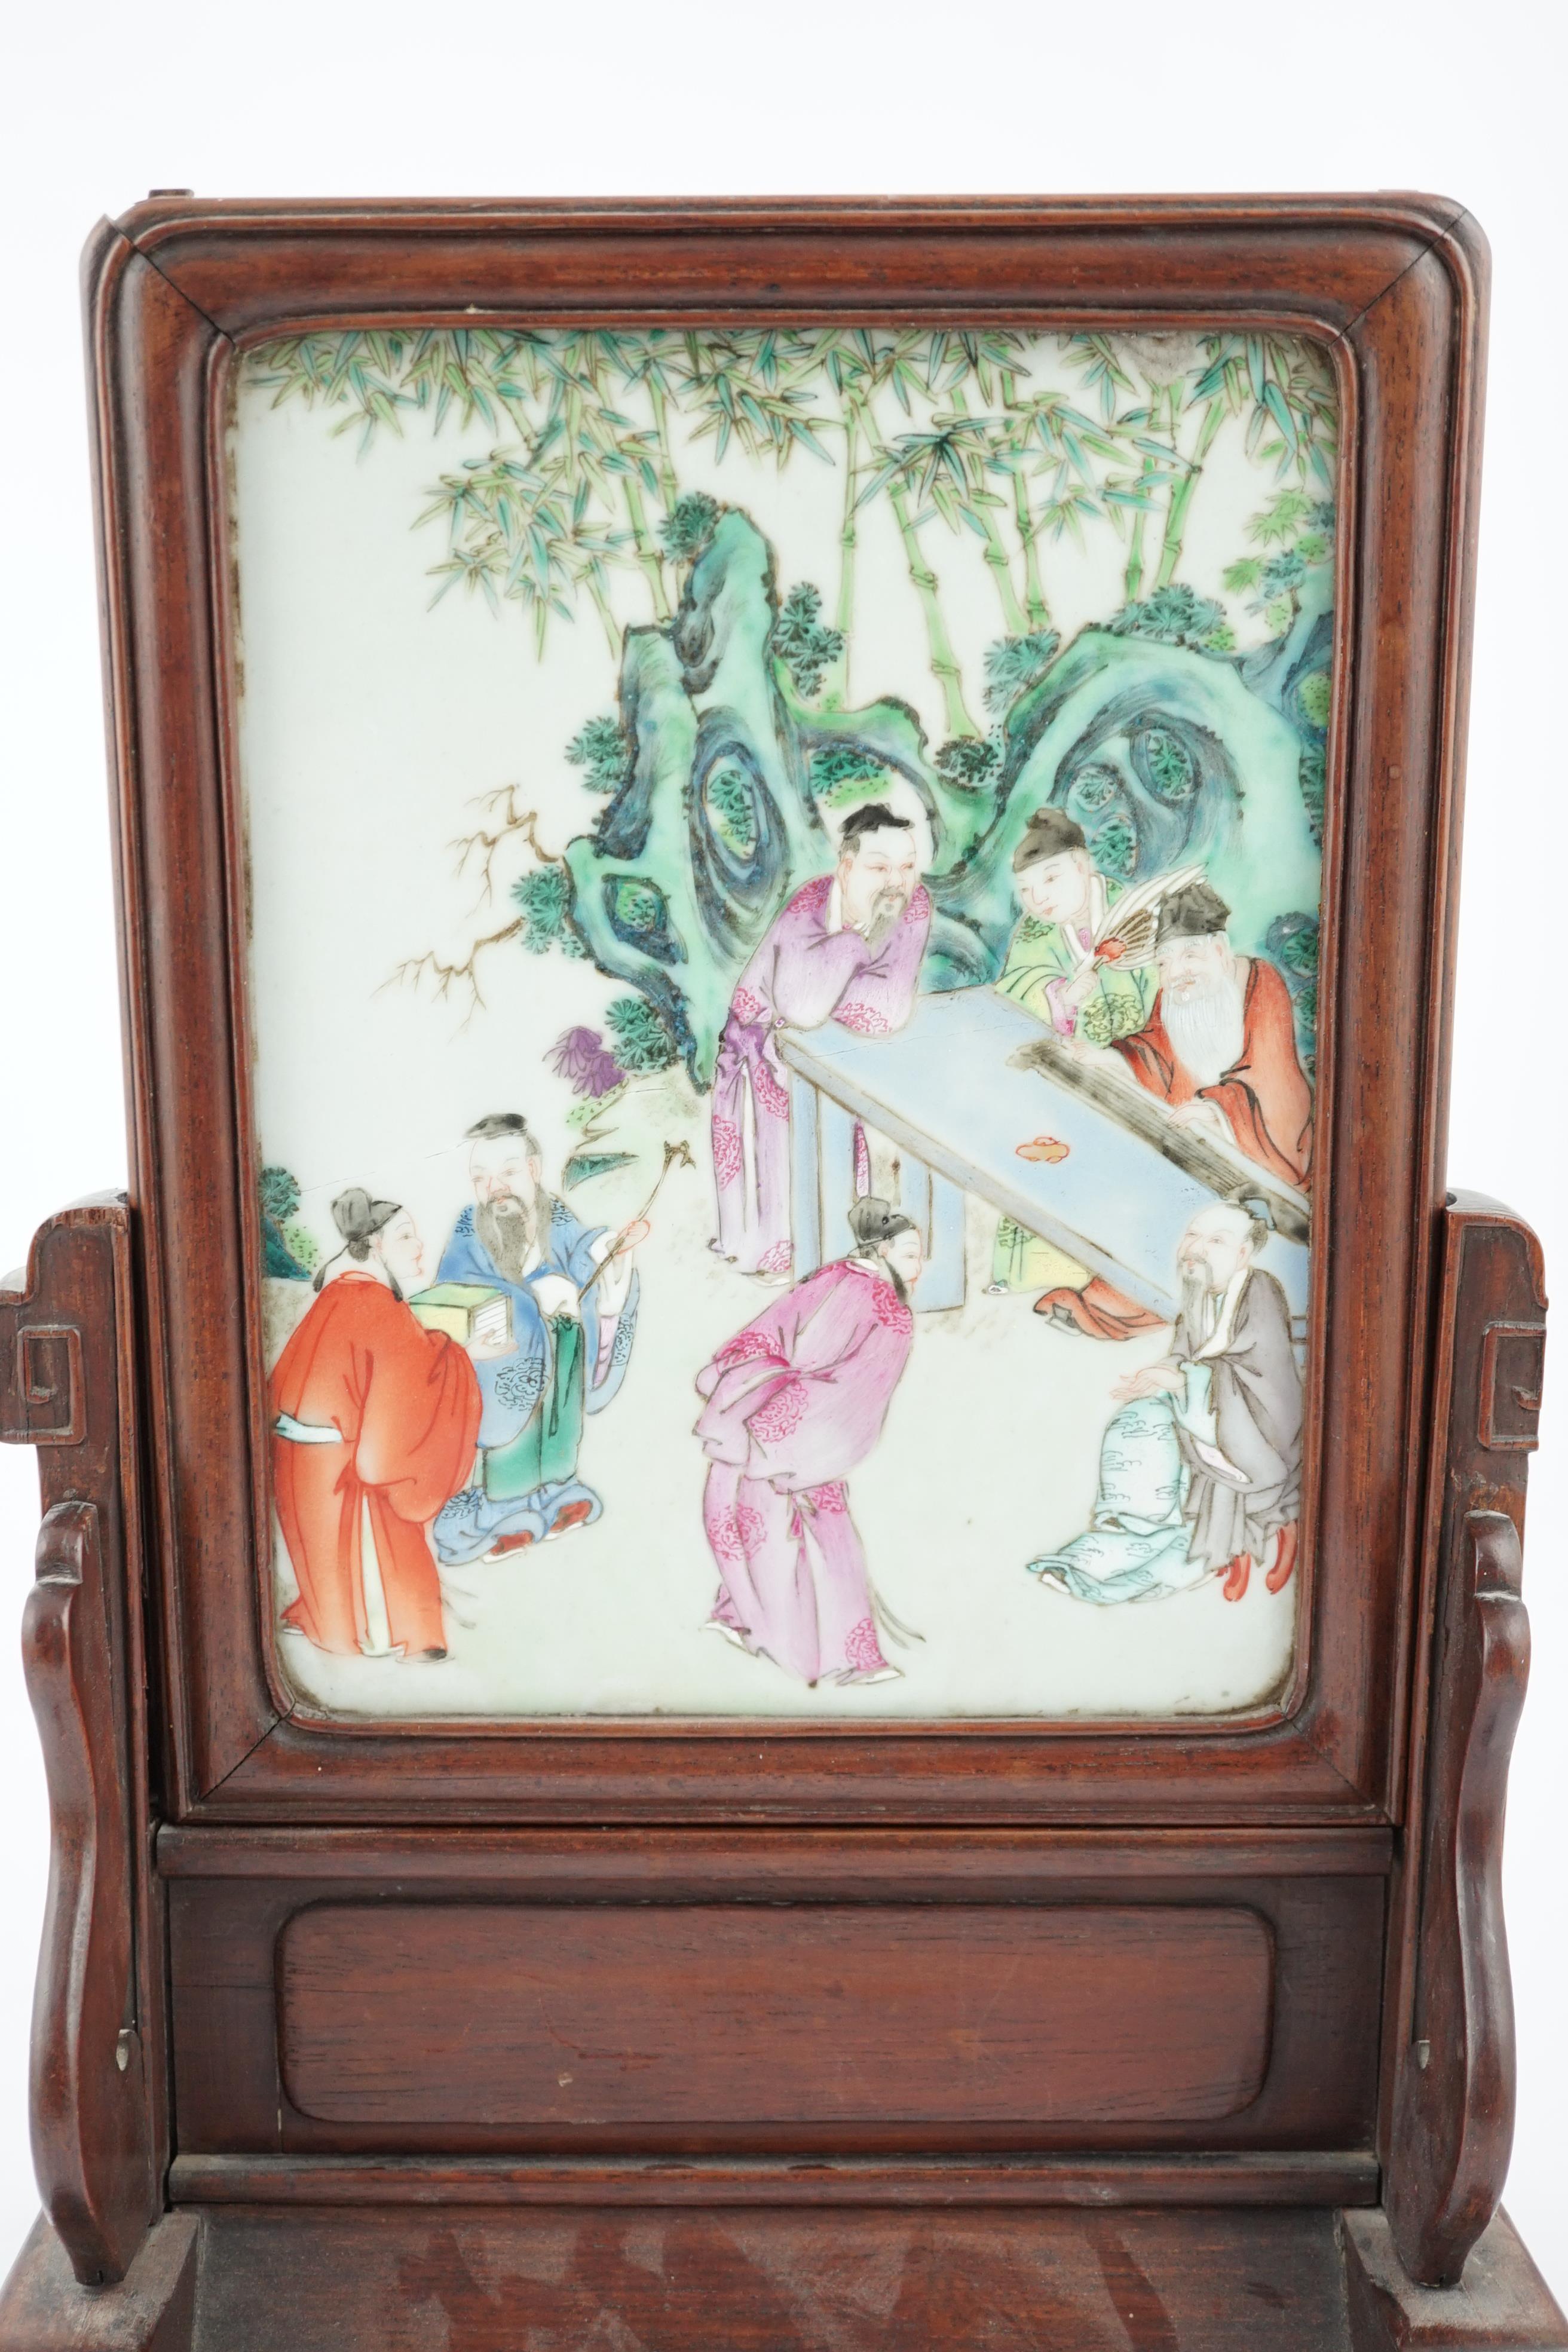 A Chinese famille rose porcelain mounted hongmu framed table screen, 19th century, some damage